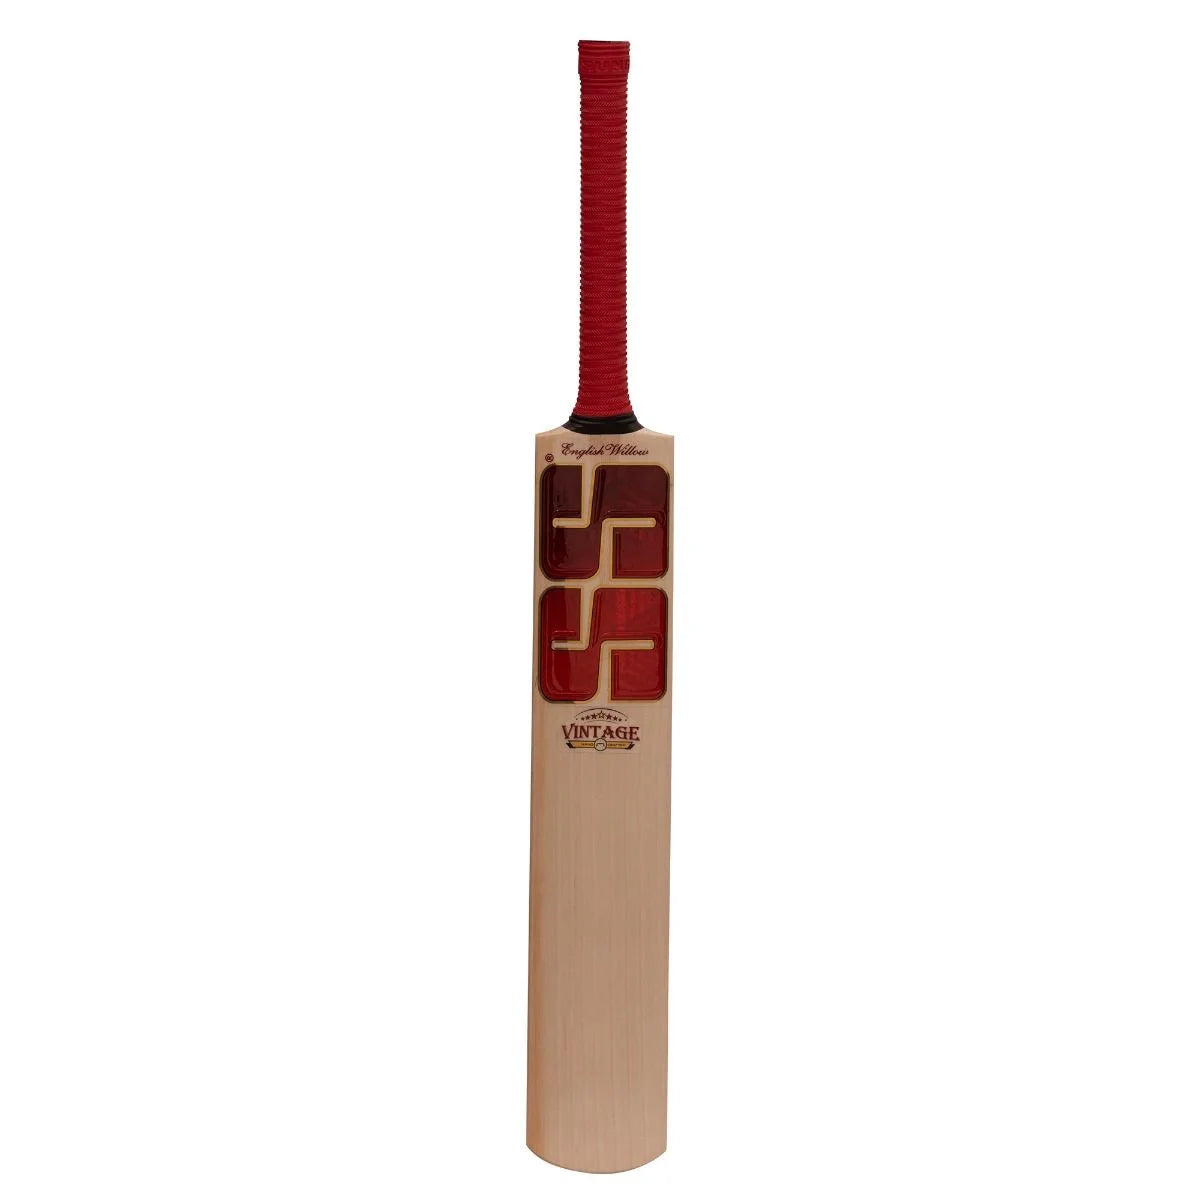 90 Cricket Bat Drawing High Res Illustrations - Getty Images